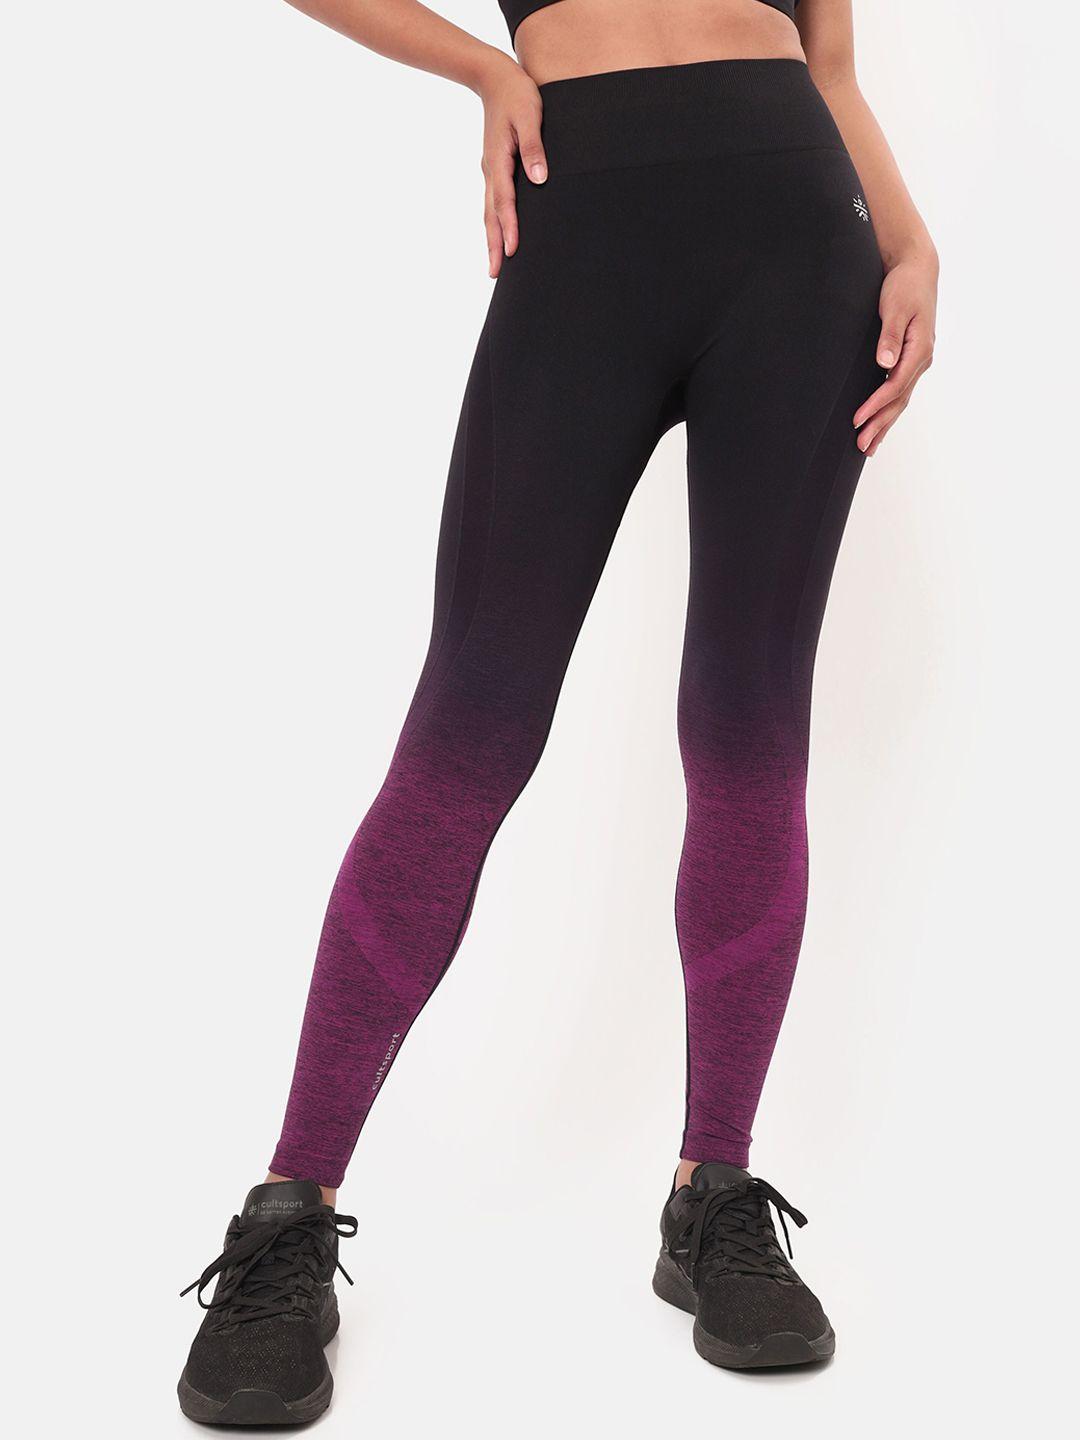 cultsport women black & purple seamless ombre anti chafing tights